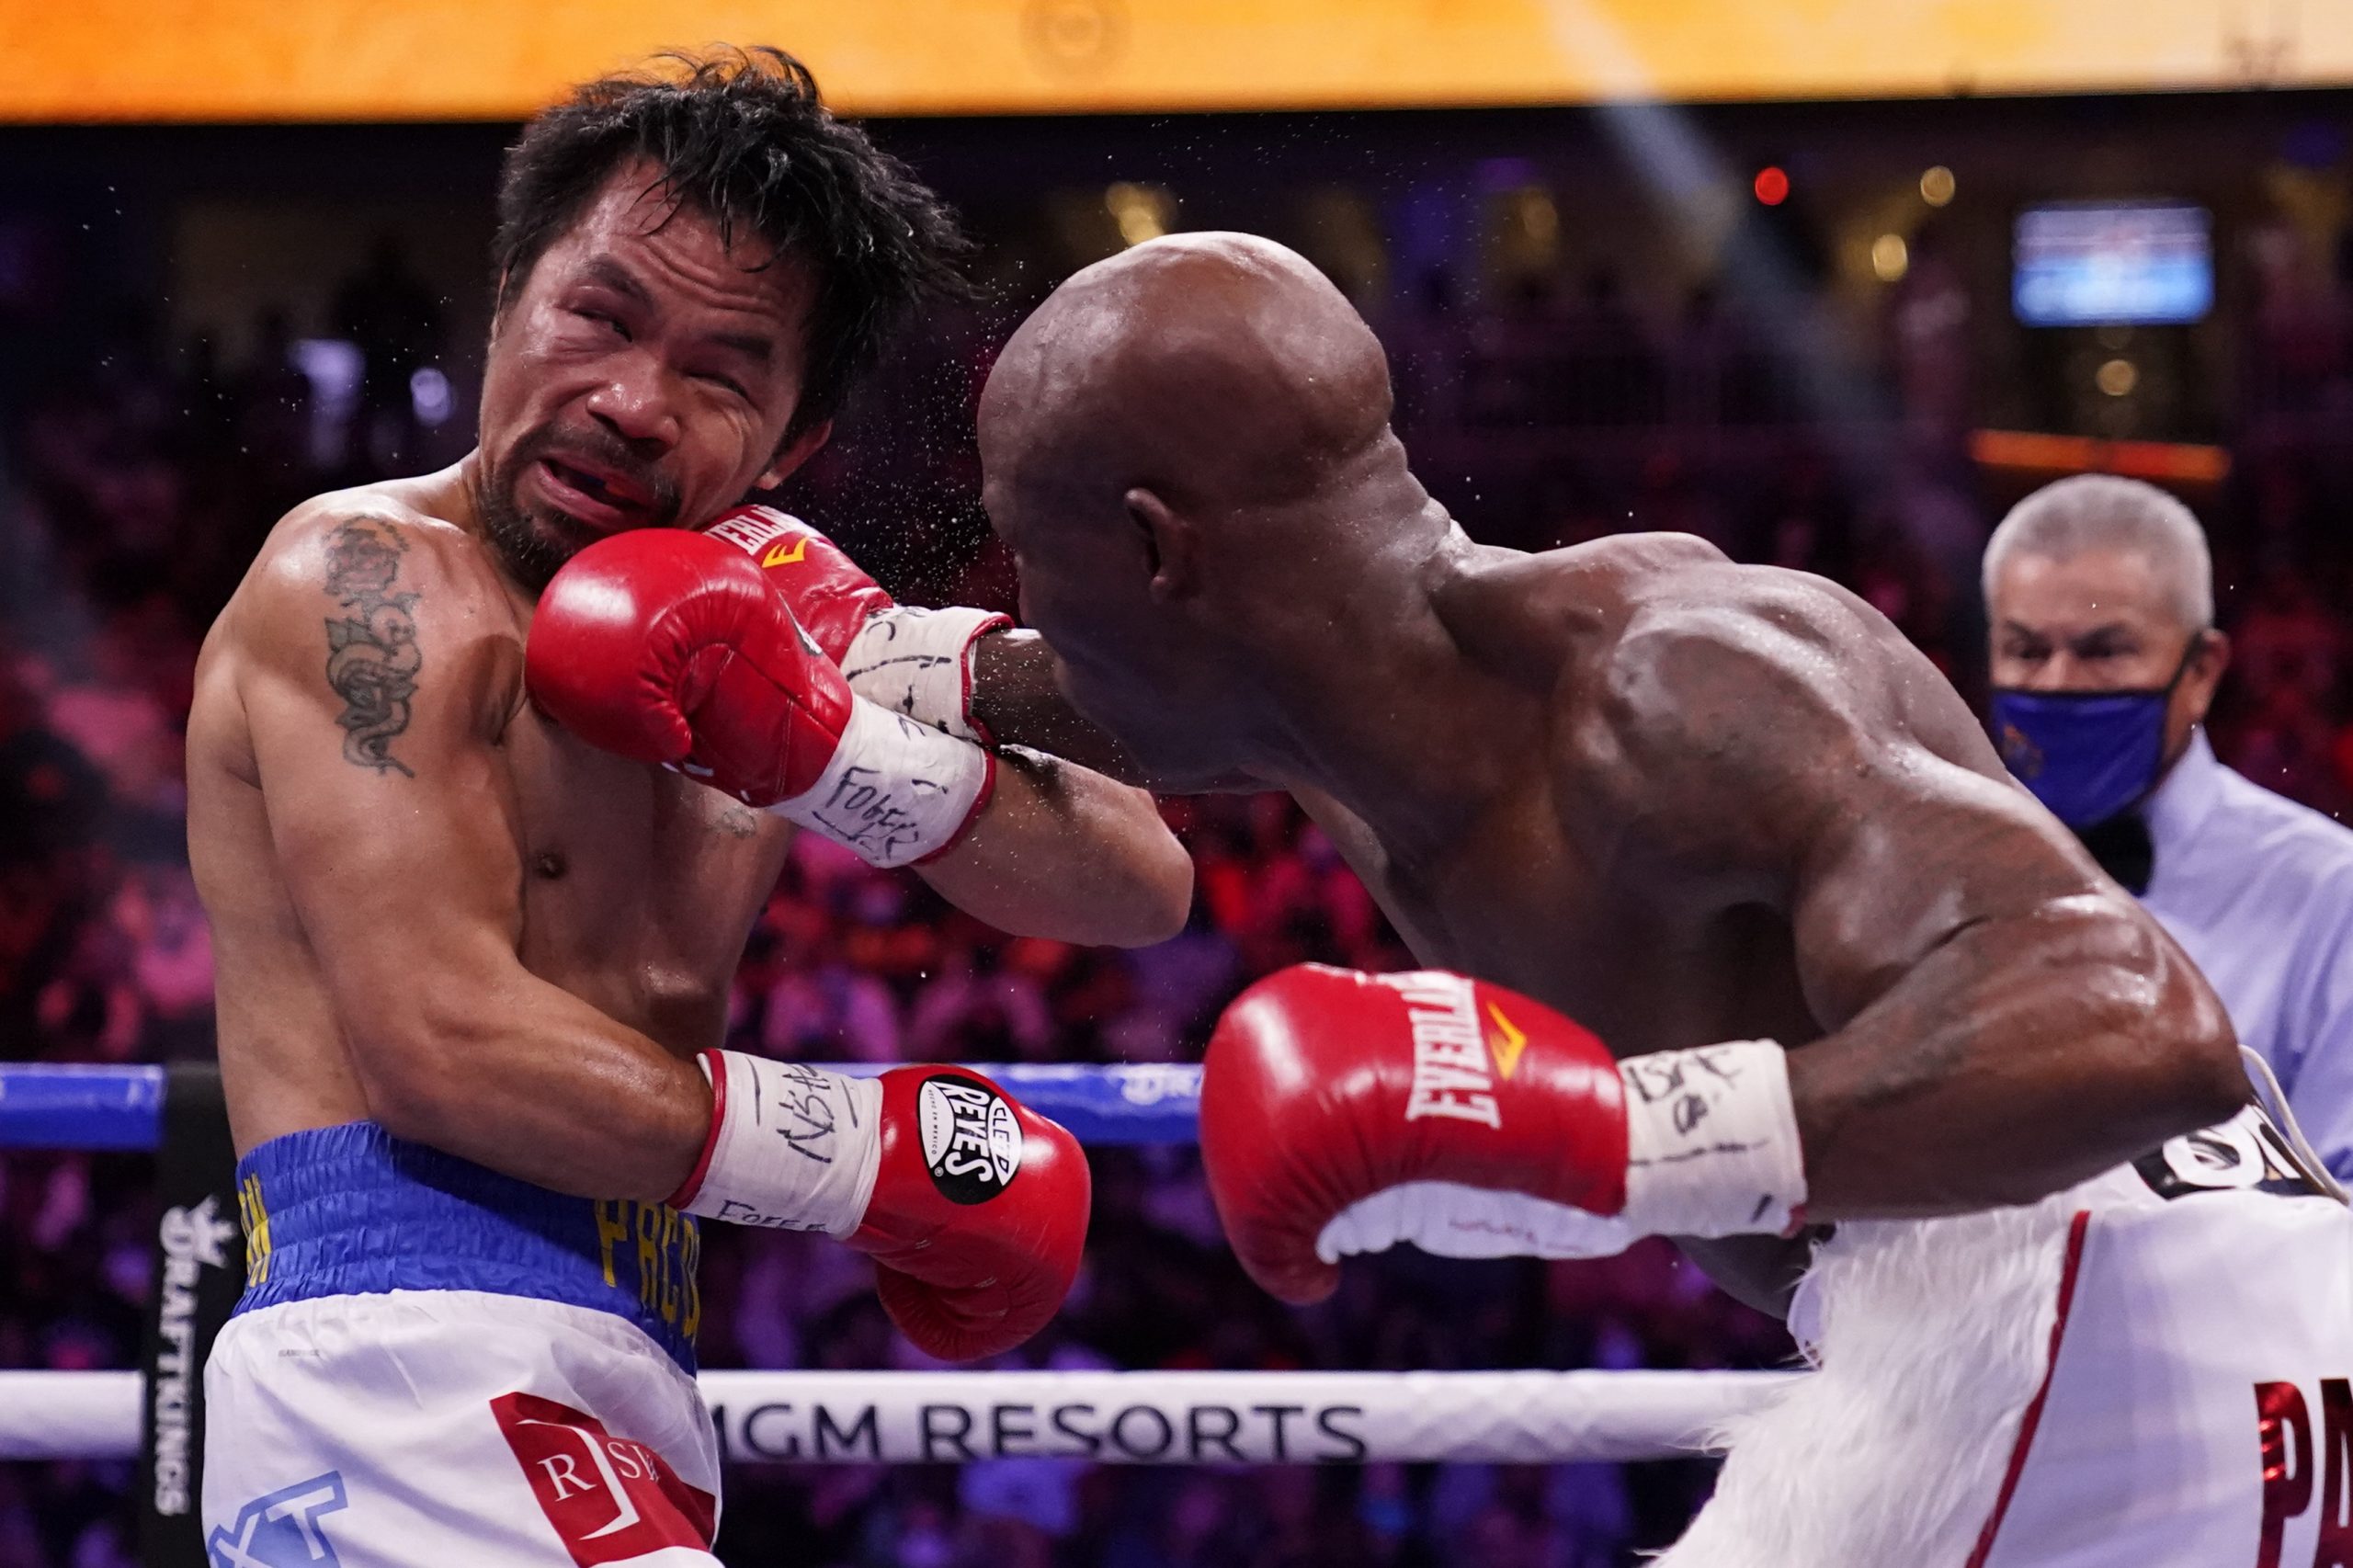 FS1 hot takes expert Skip Bayless somehow believes Manny Pacquiao should have been granted the decision over Yordenis Ugas over the weekend